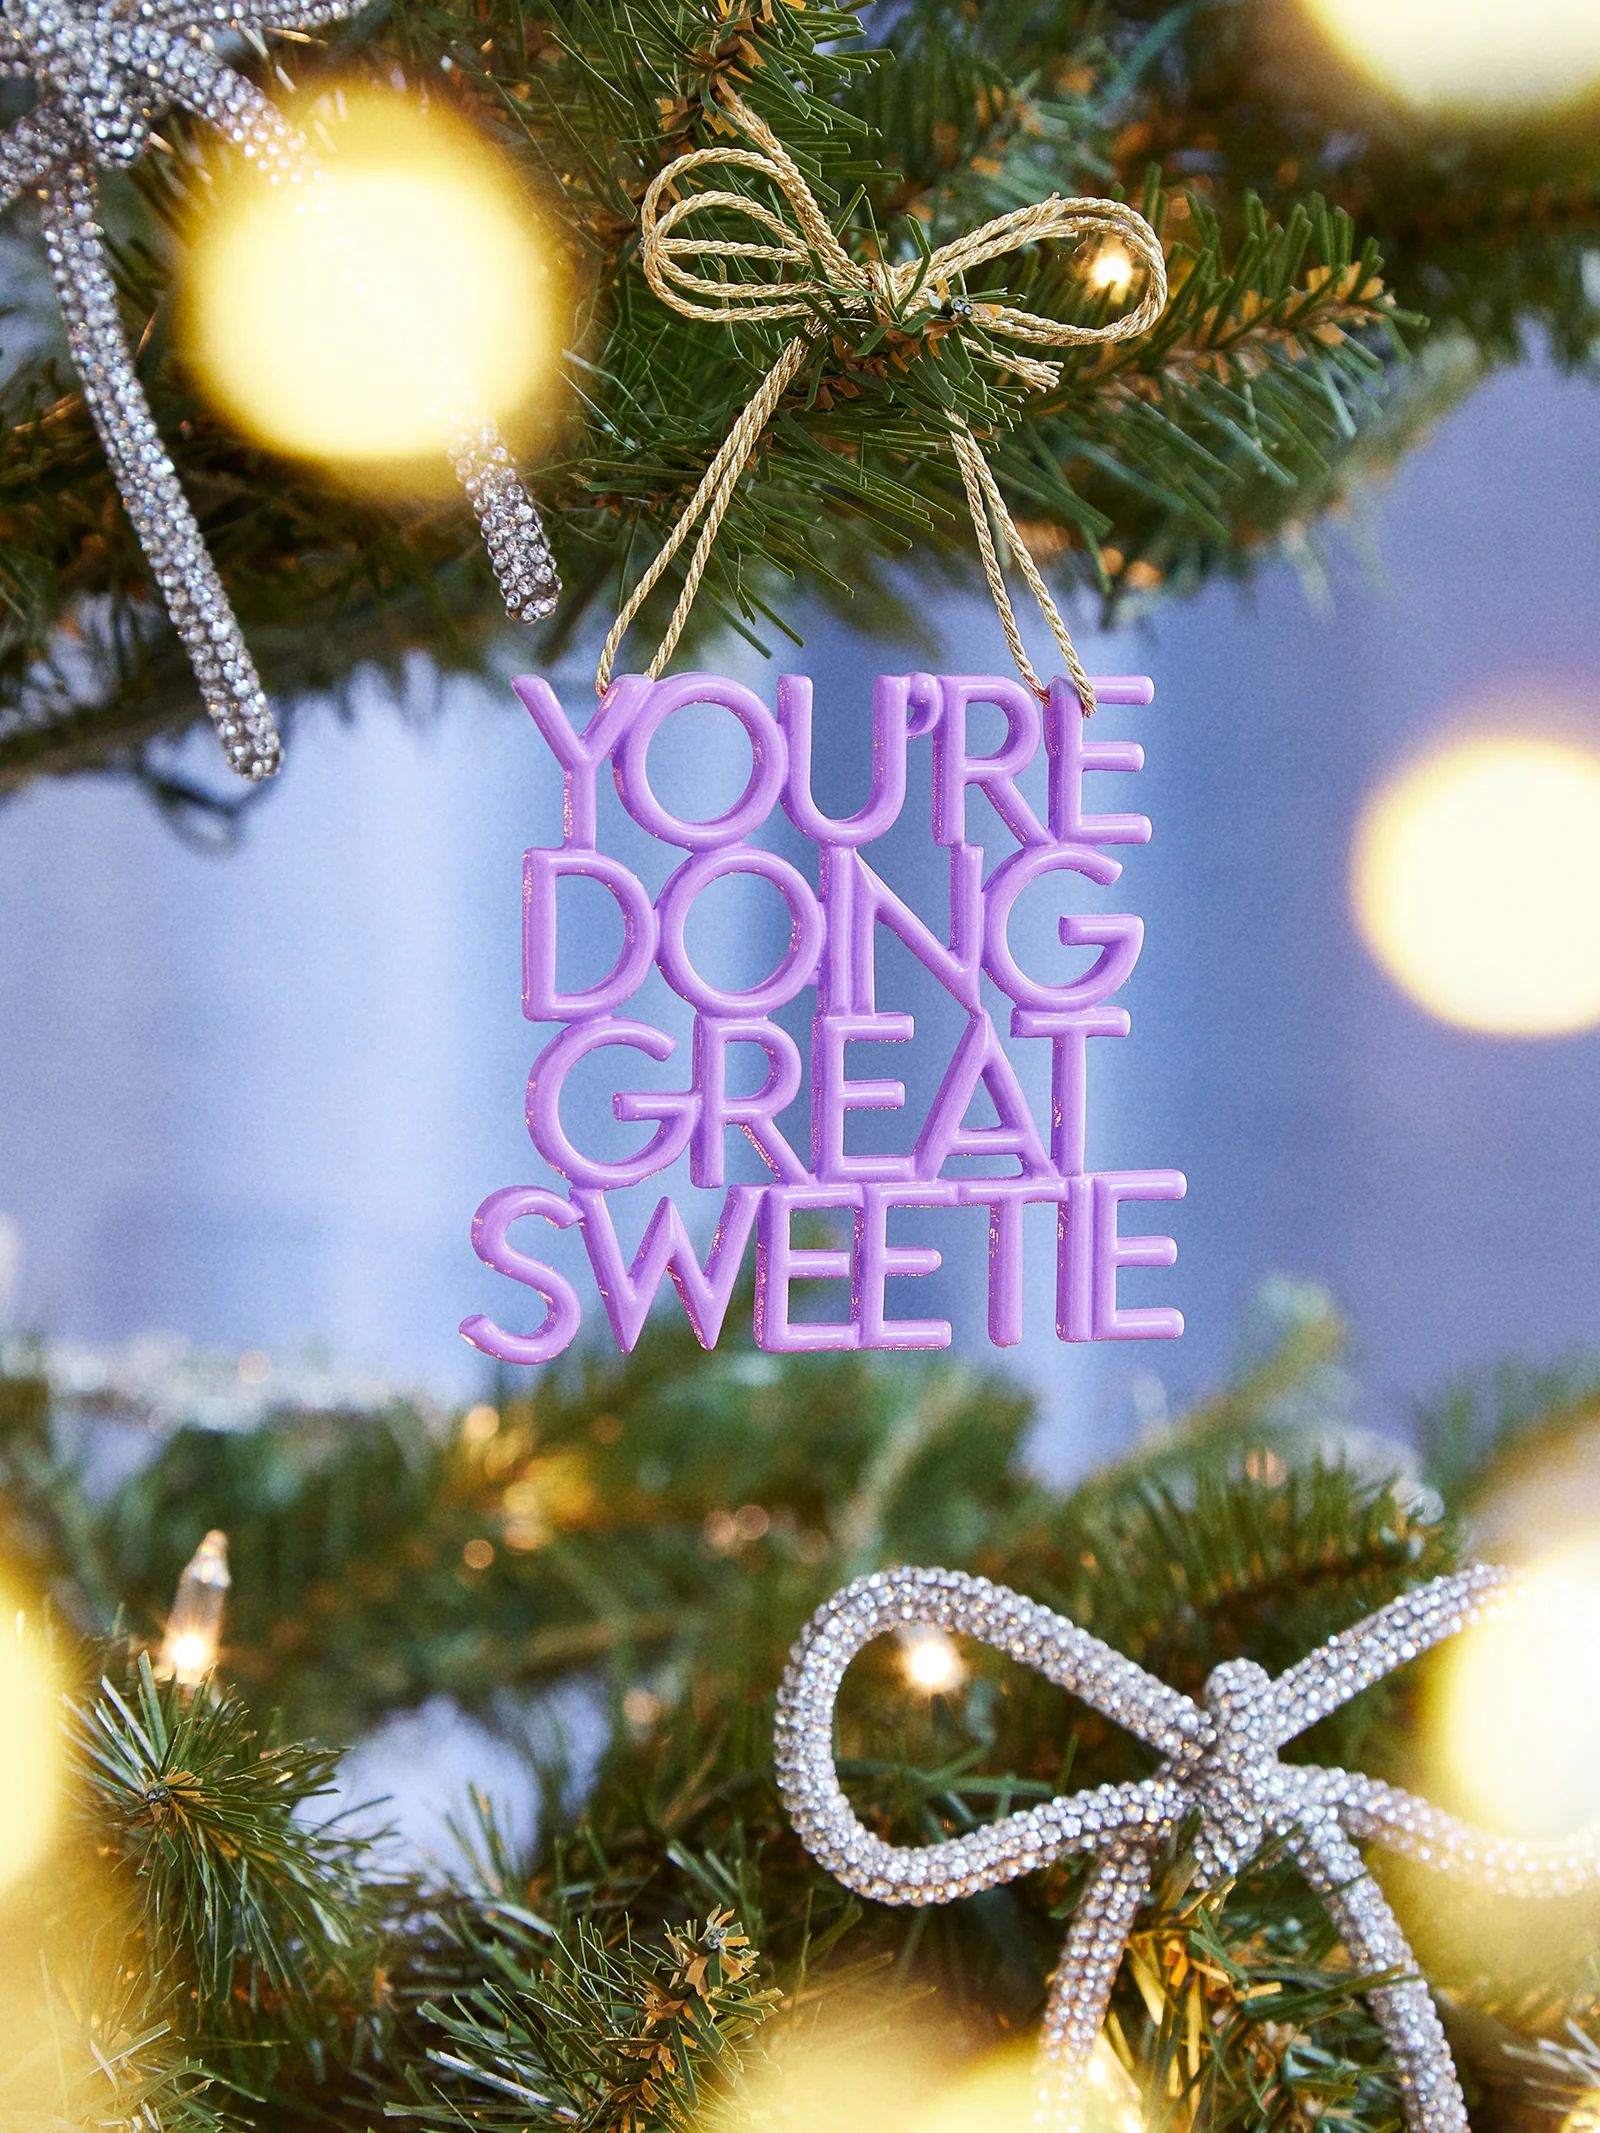 Say It All Ornament - You're Doing Great Sweetie Ornament | BaubleBar (US)